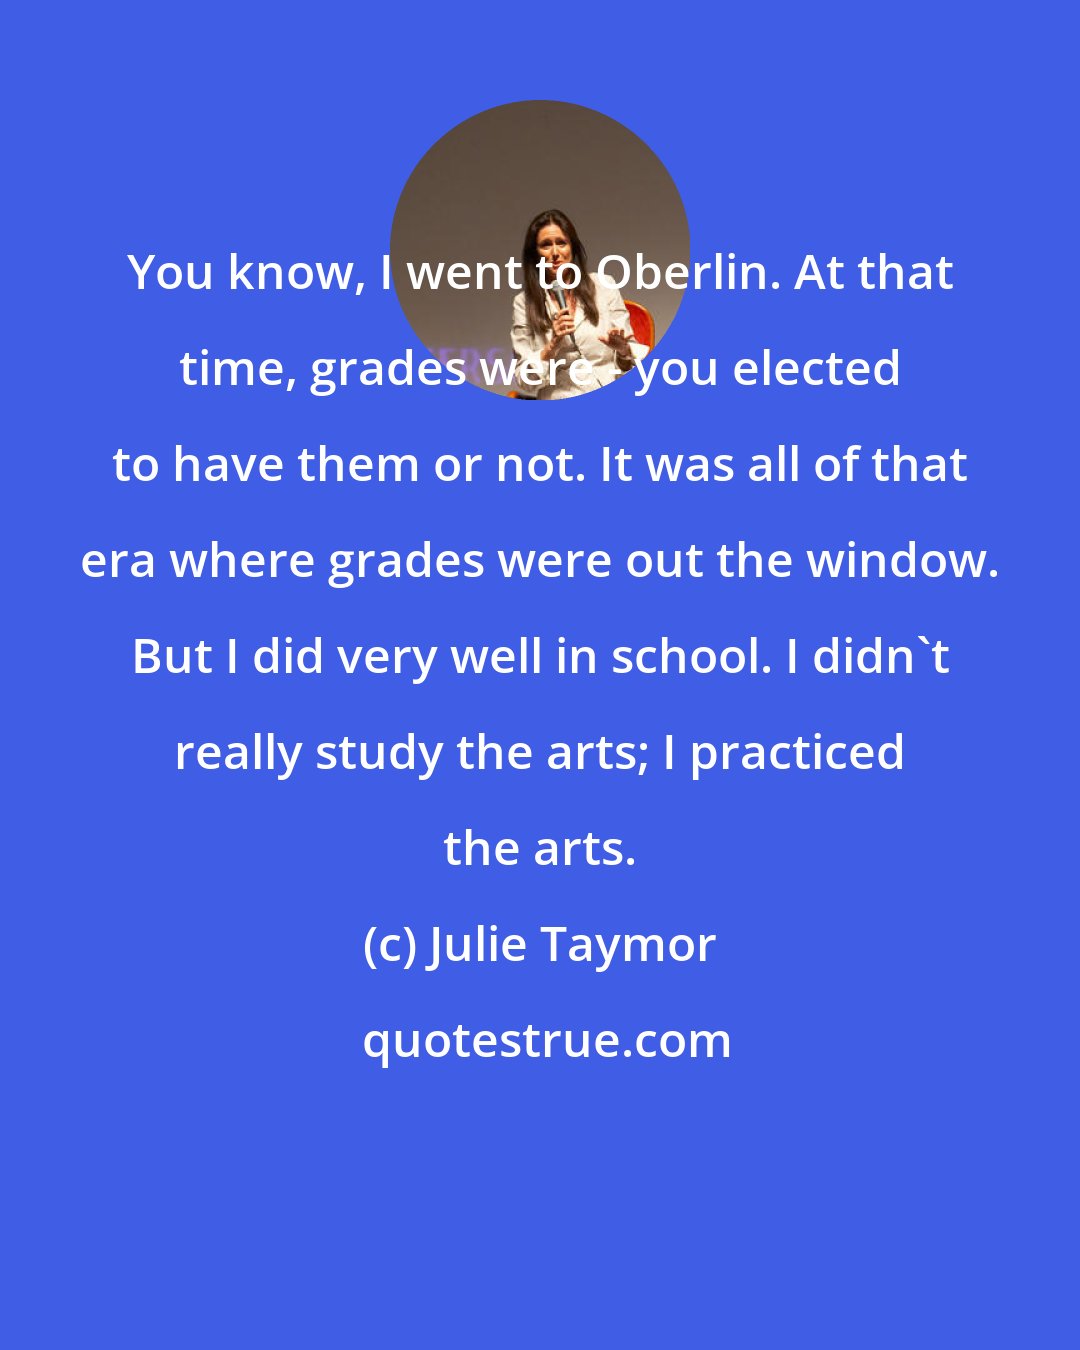 Julie Taymor: You know, I went to Oberlin. At that time, grades were - you elected to have them or not. It was all of that era where grades were out the window. But I did very well in school. I didn't really study the arts; I practiced the arts.